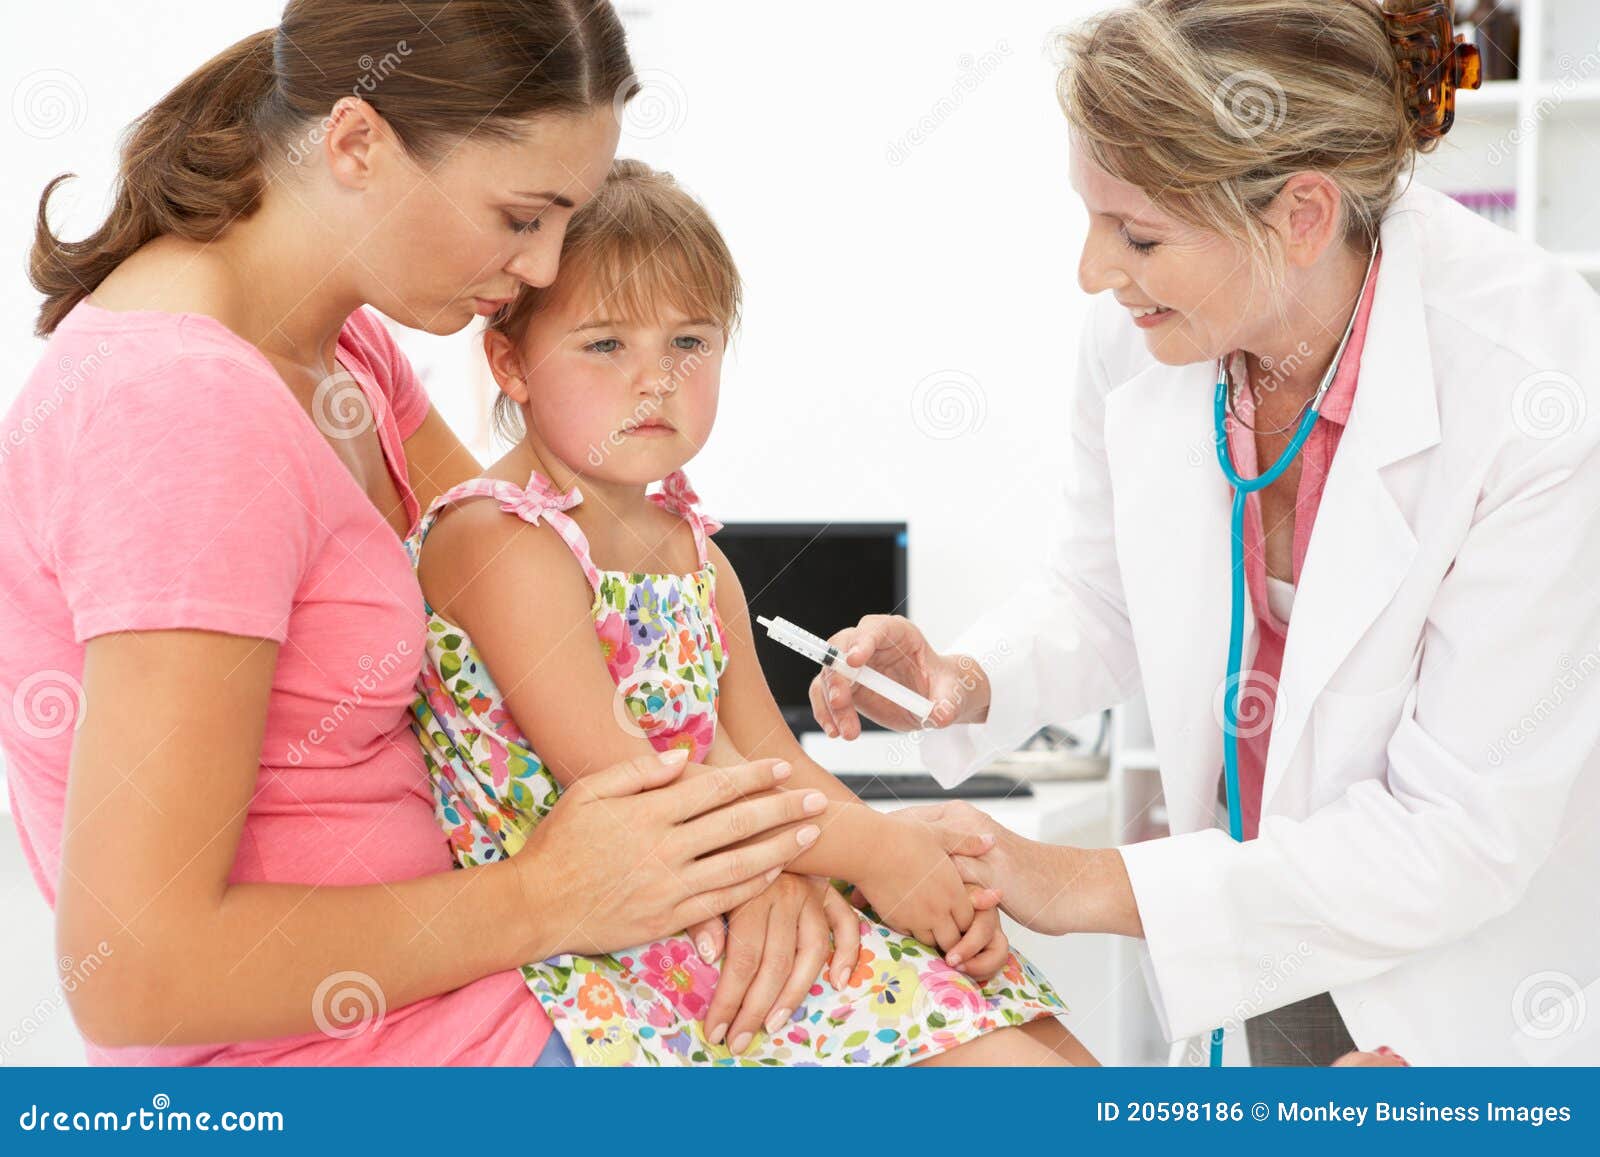 female doctor injecting child